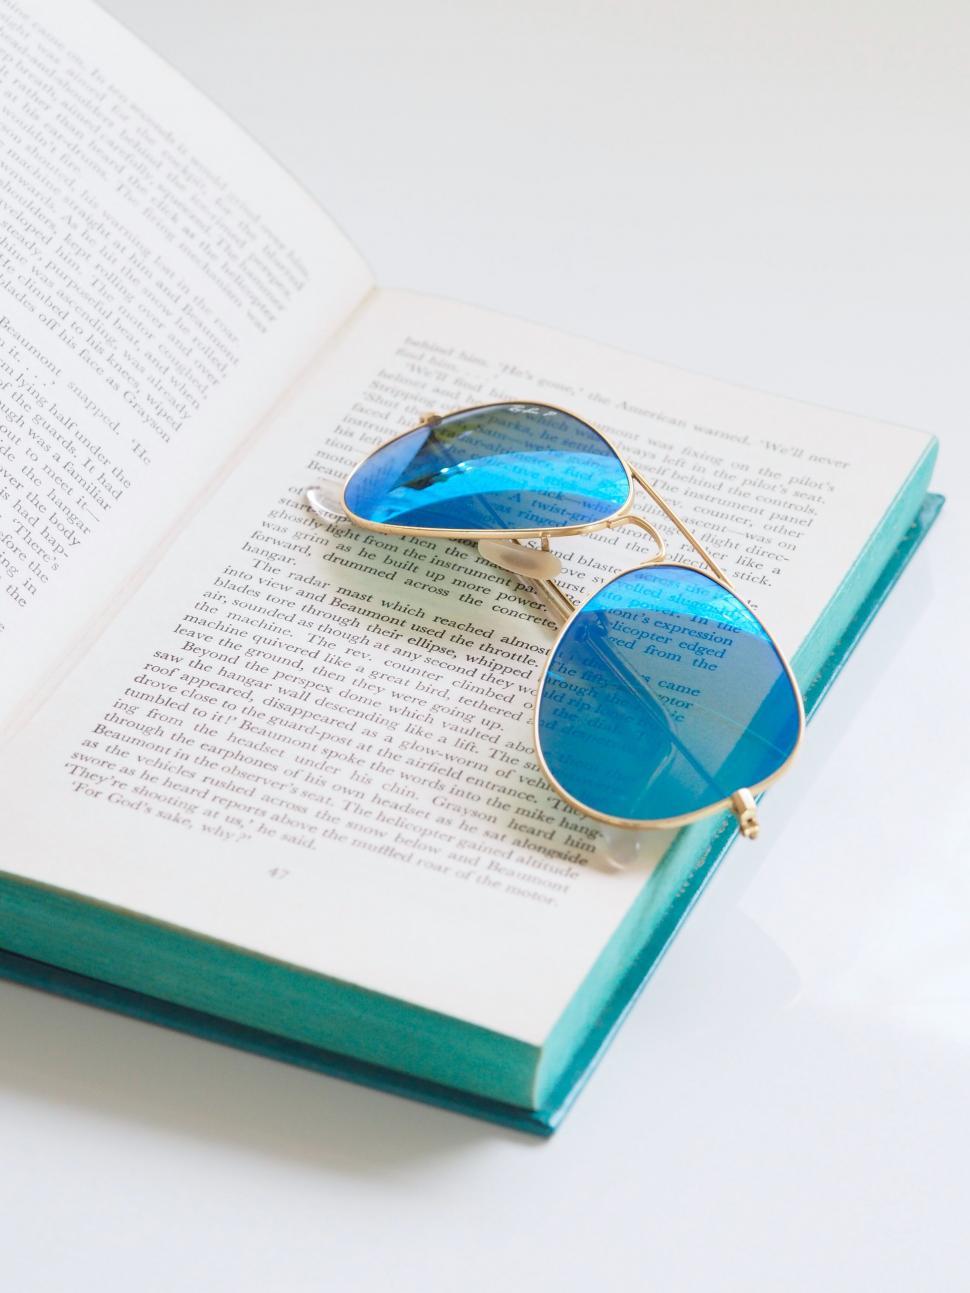 Free Image of Open book with sunglasses on page 